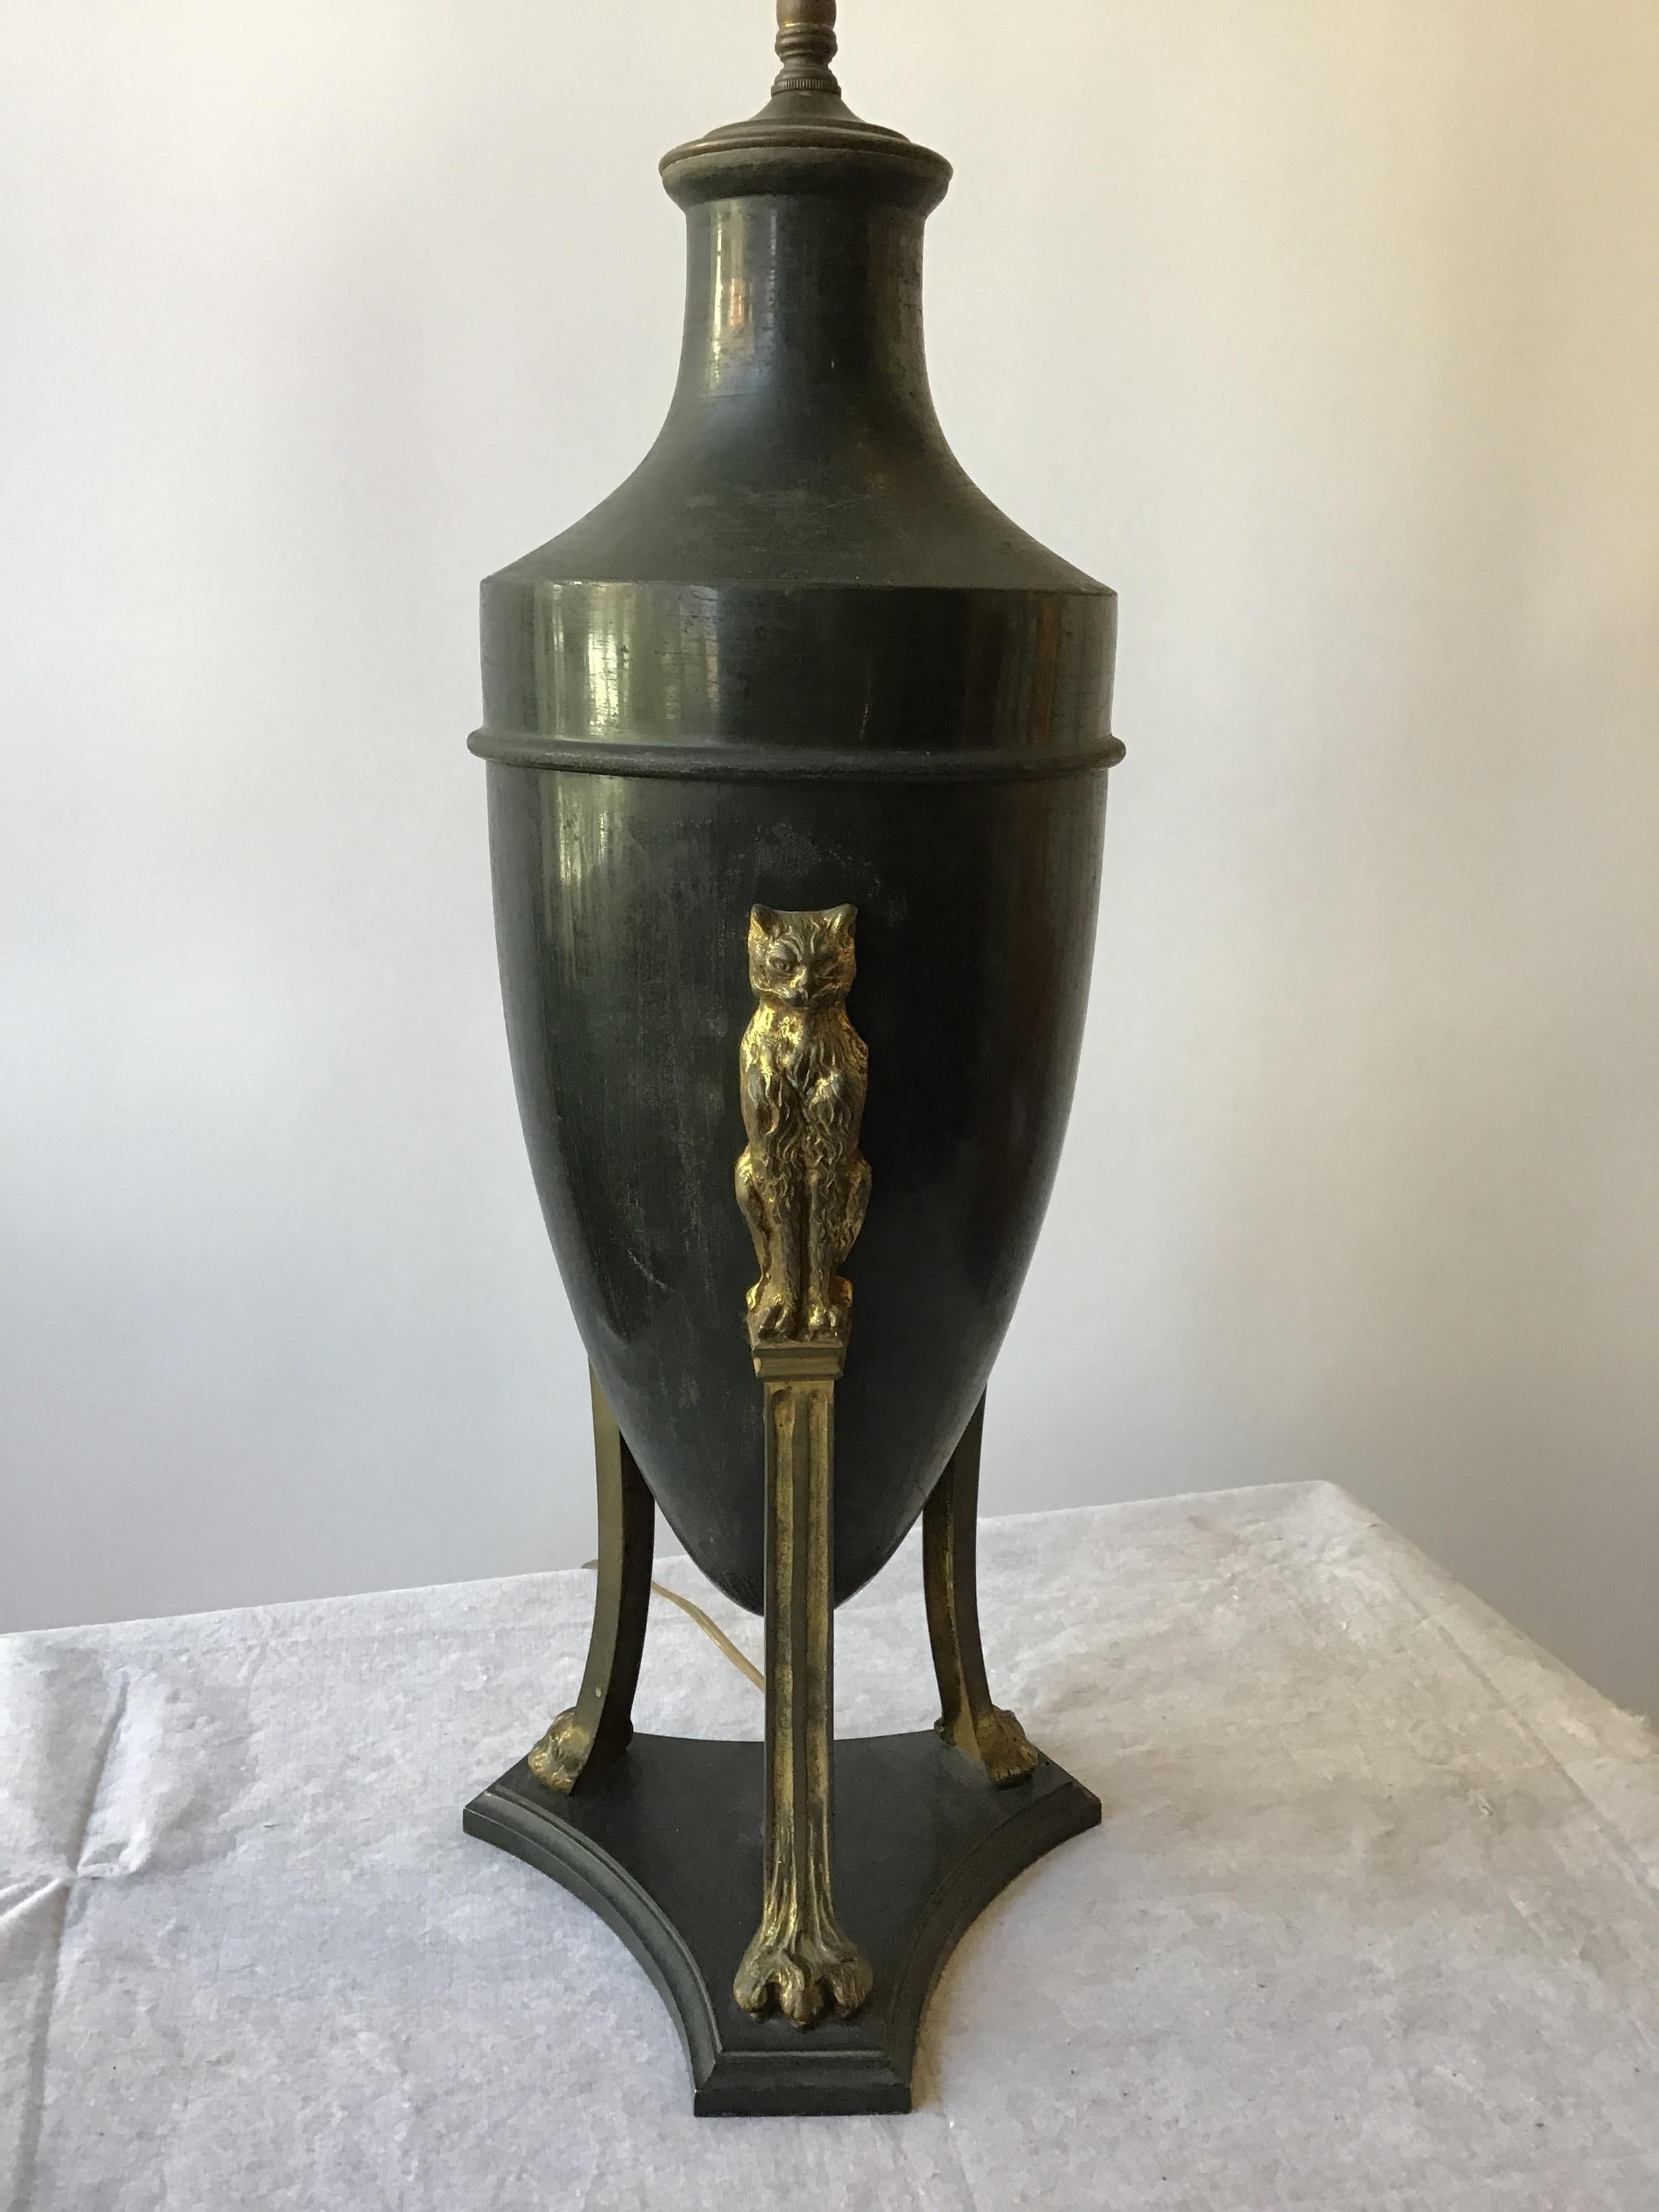 1900 classical metal urn lamp adorned with gilt cats. One of a kind!